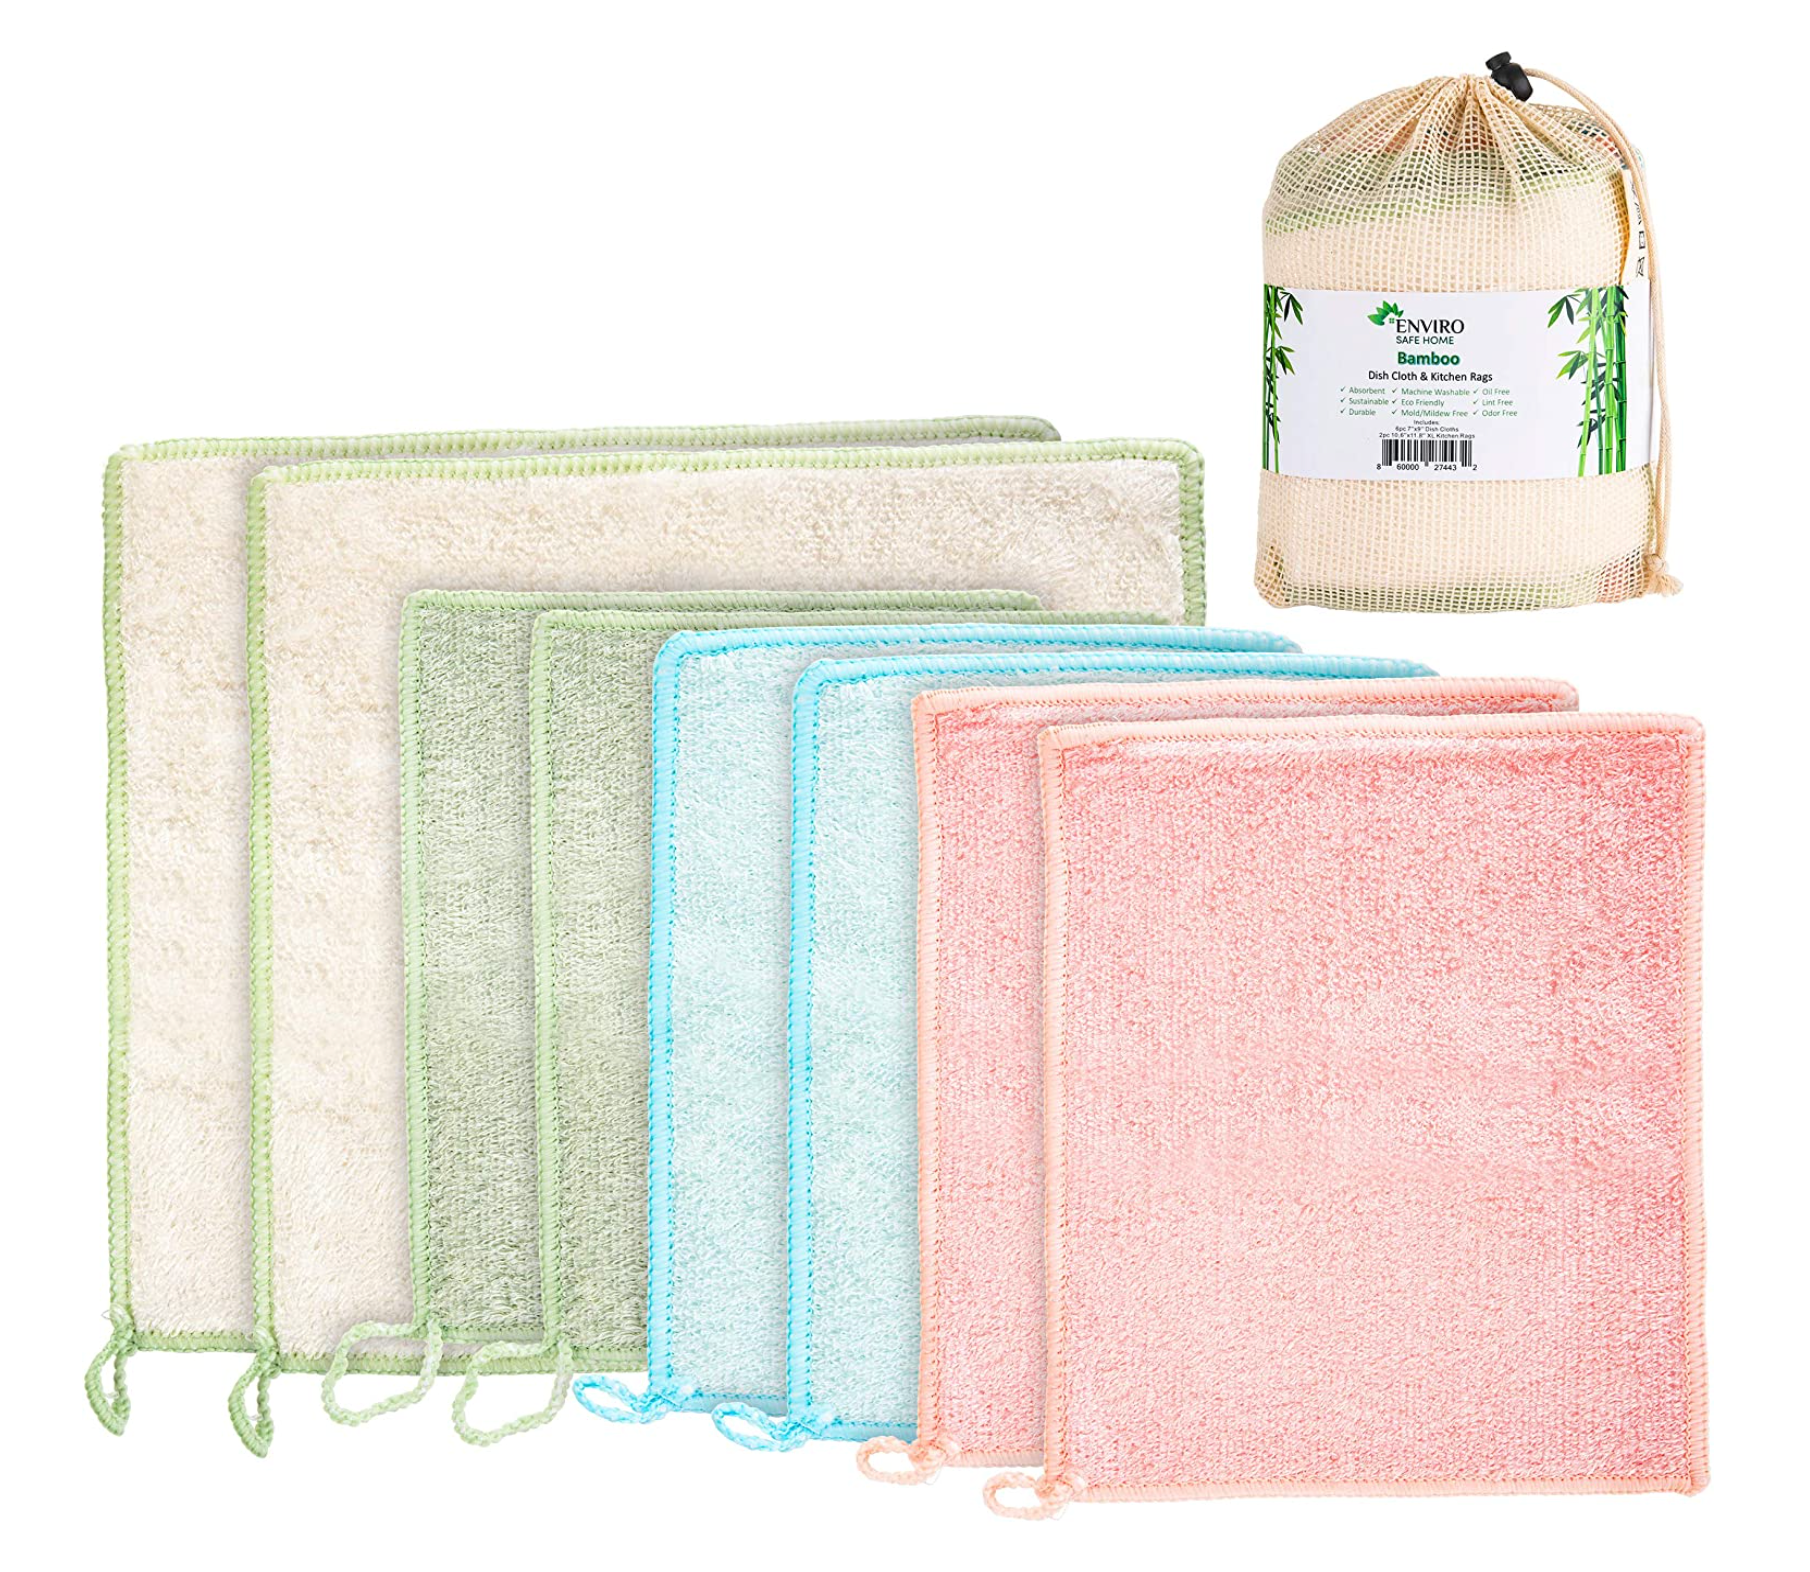 Bamboo Dishcloths & Kitchen Wipe,12 pack,Washable, Reusable